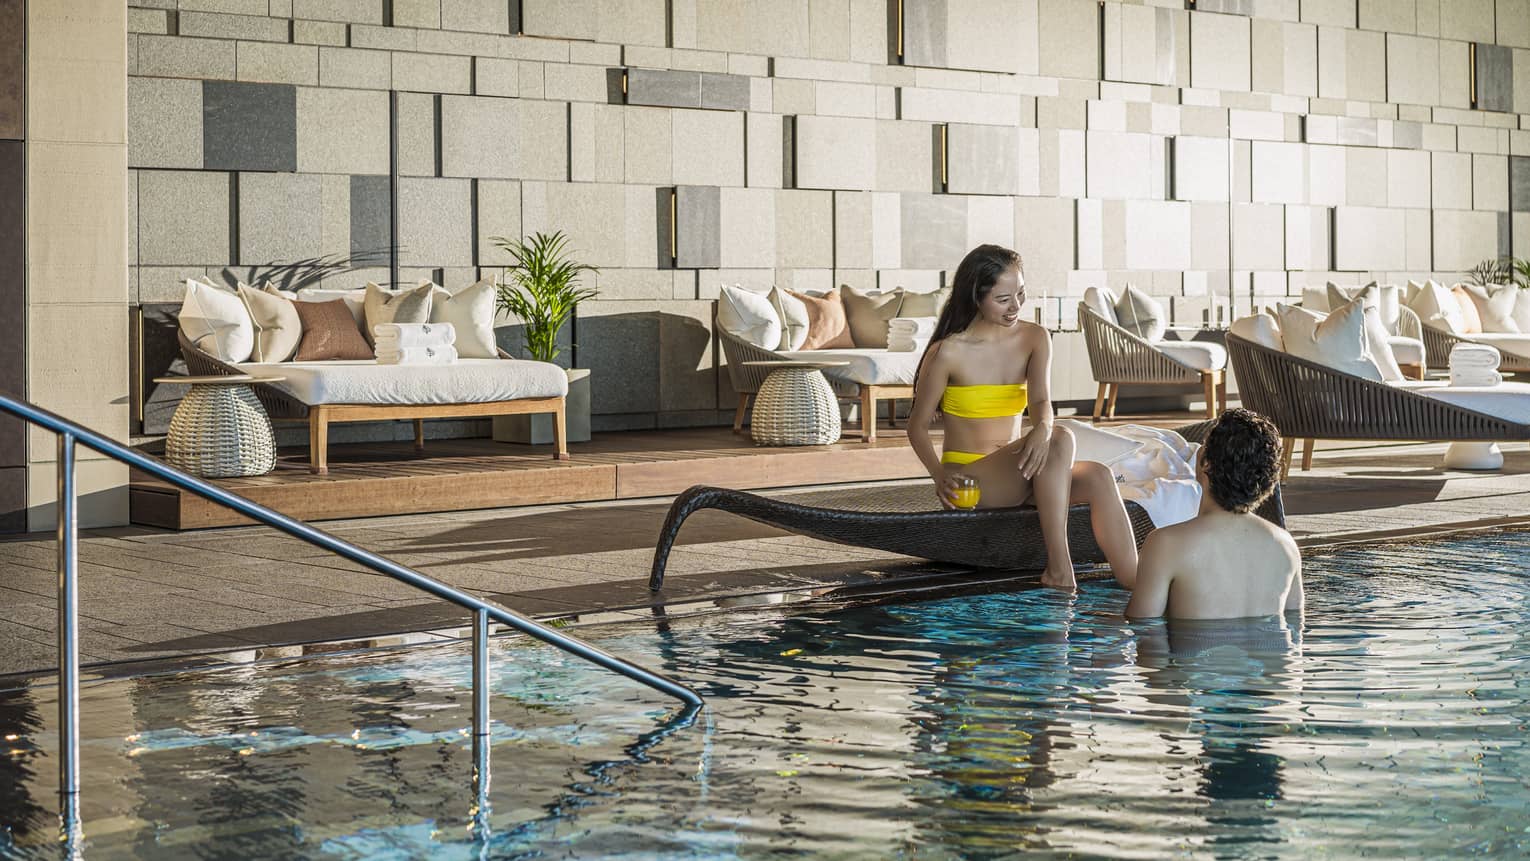 Couple relaxes poolside at the indoor pool